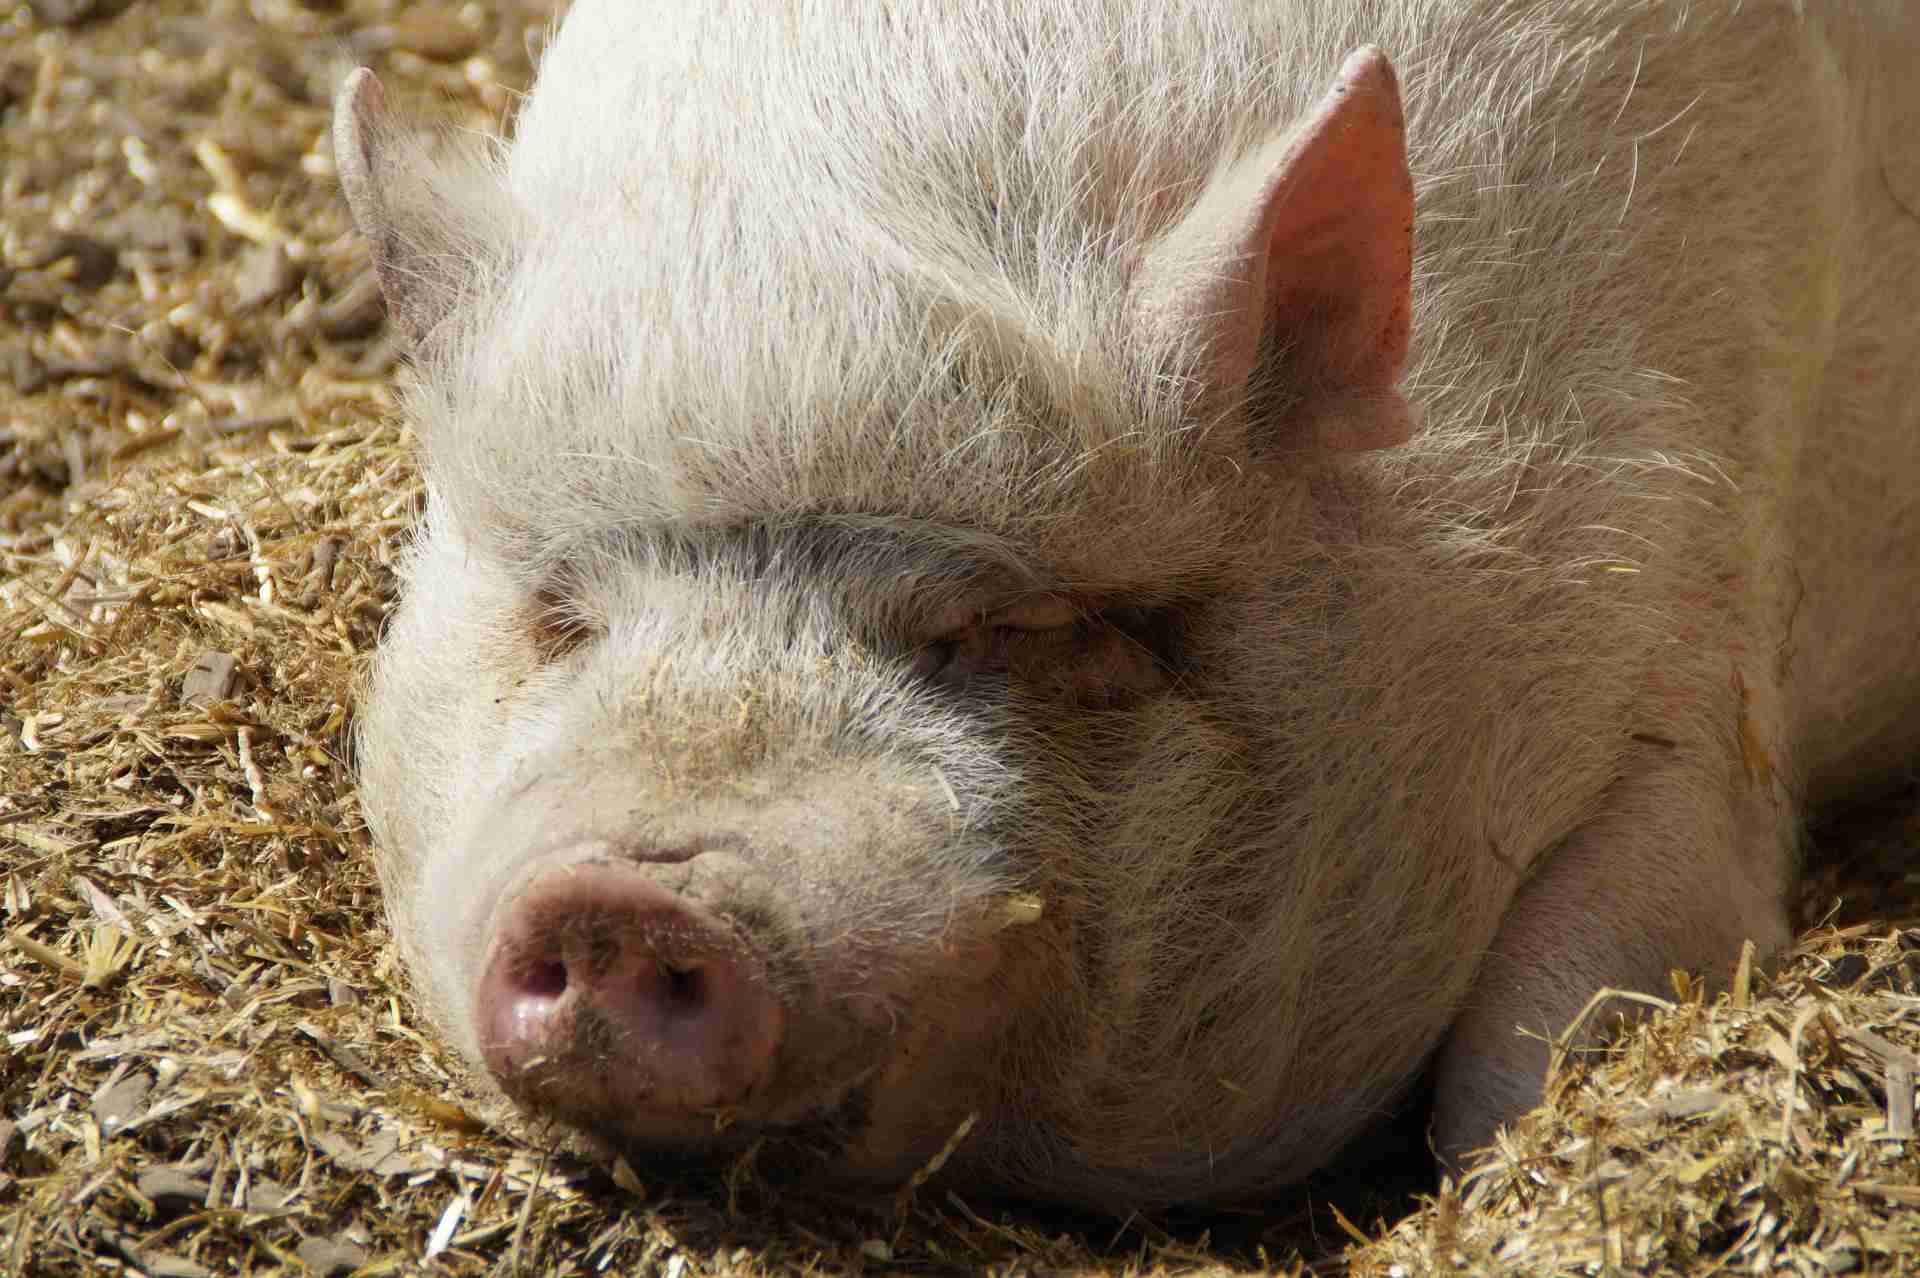 A close-up of a potbellied pig.